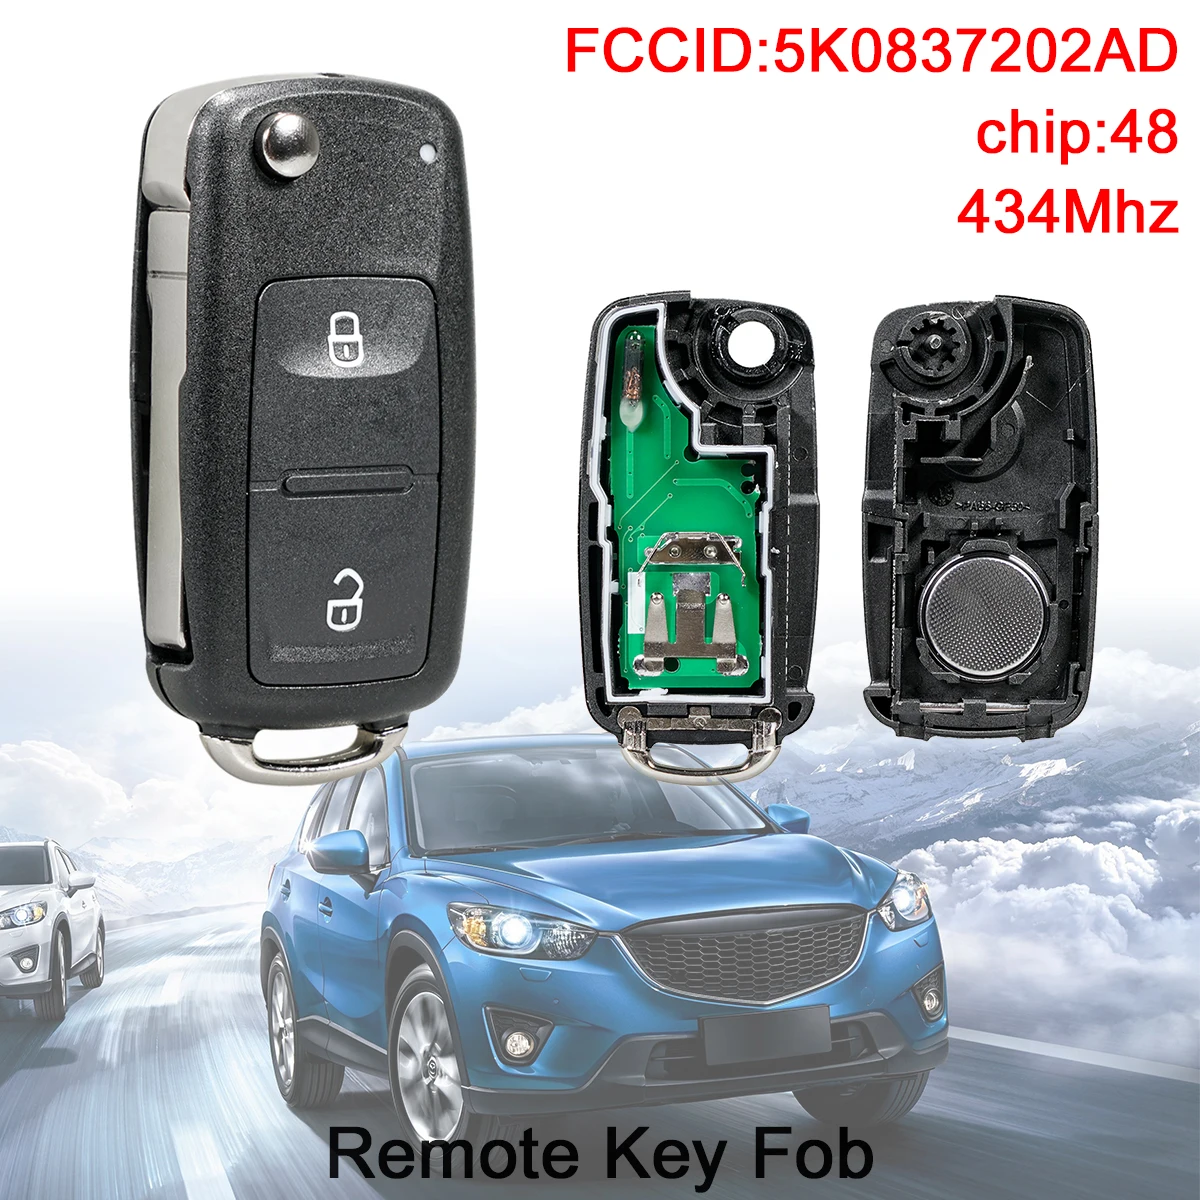 2 Buttons 433MHz  Keyless Smart Remote Car Key Fob with ID48 Chip5K0837202AD Fit for Volkswagen VW  Transporter 2011-2016 4d0837231a 433mhz id48 chip 3 buttons remote control old model folding car key for audi a3 a4 a6 a8 b5 tt rs4